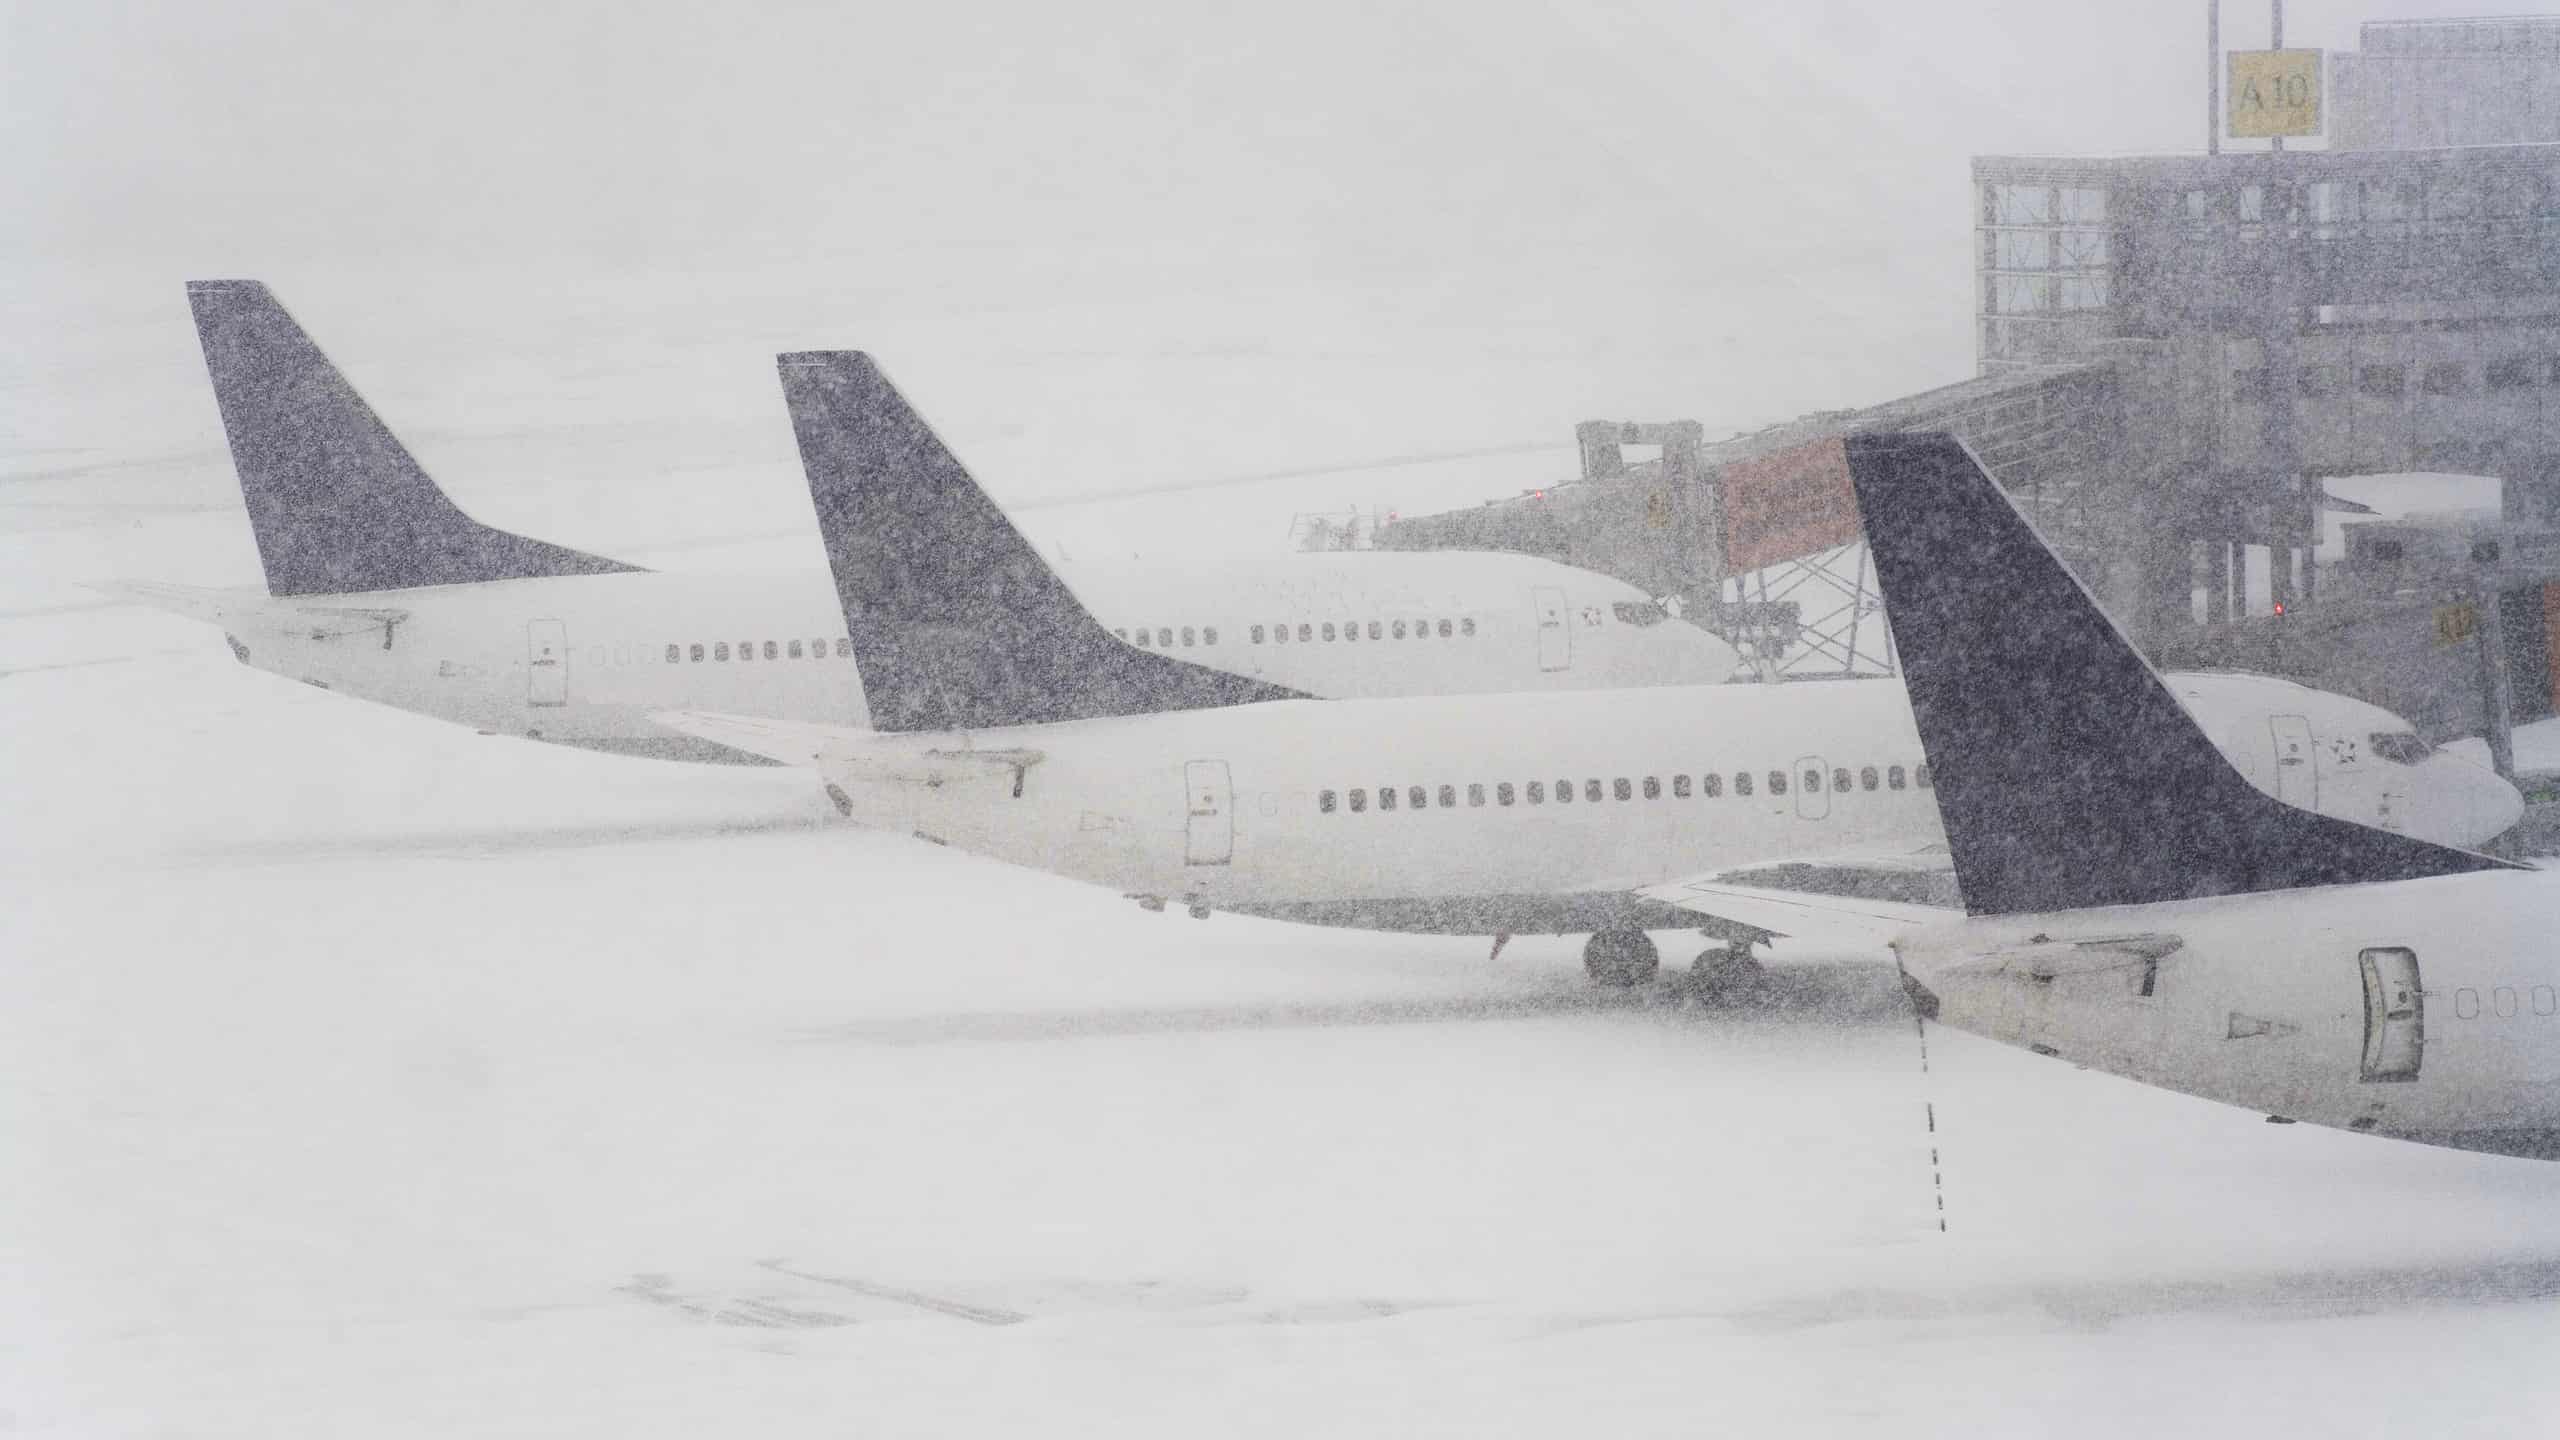 Blizzard at airport